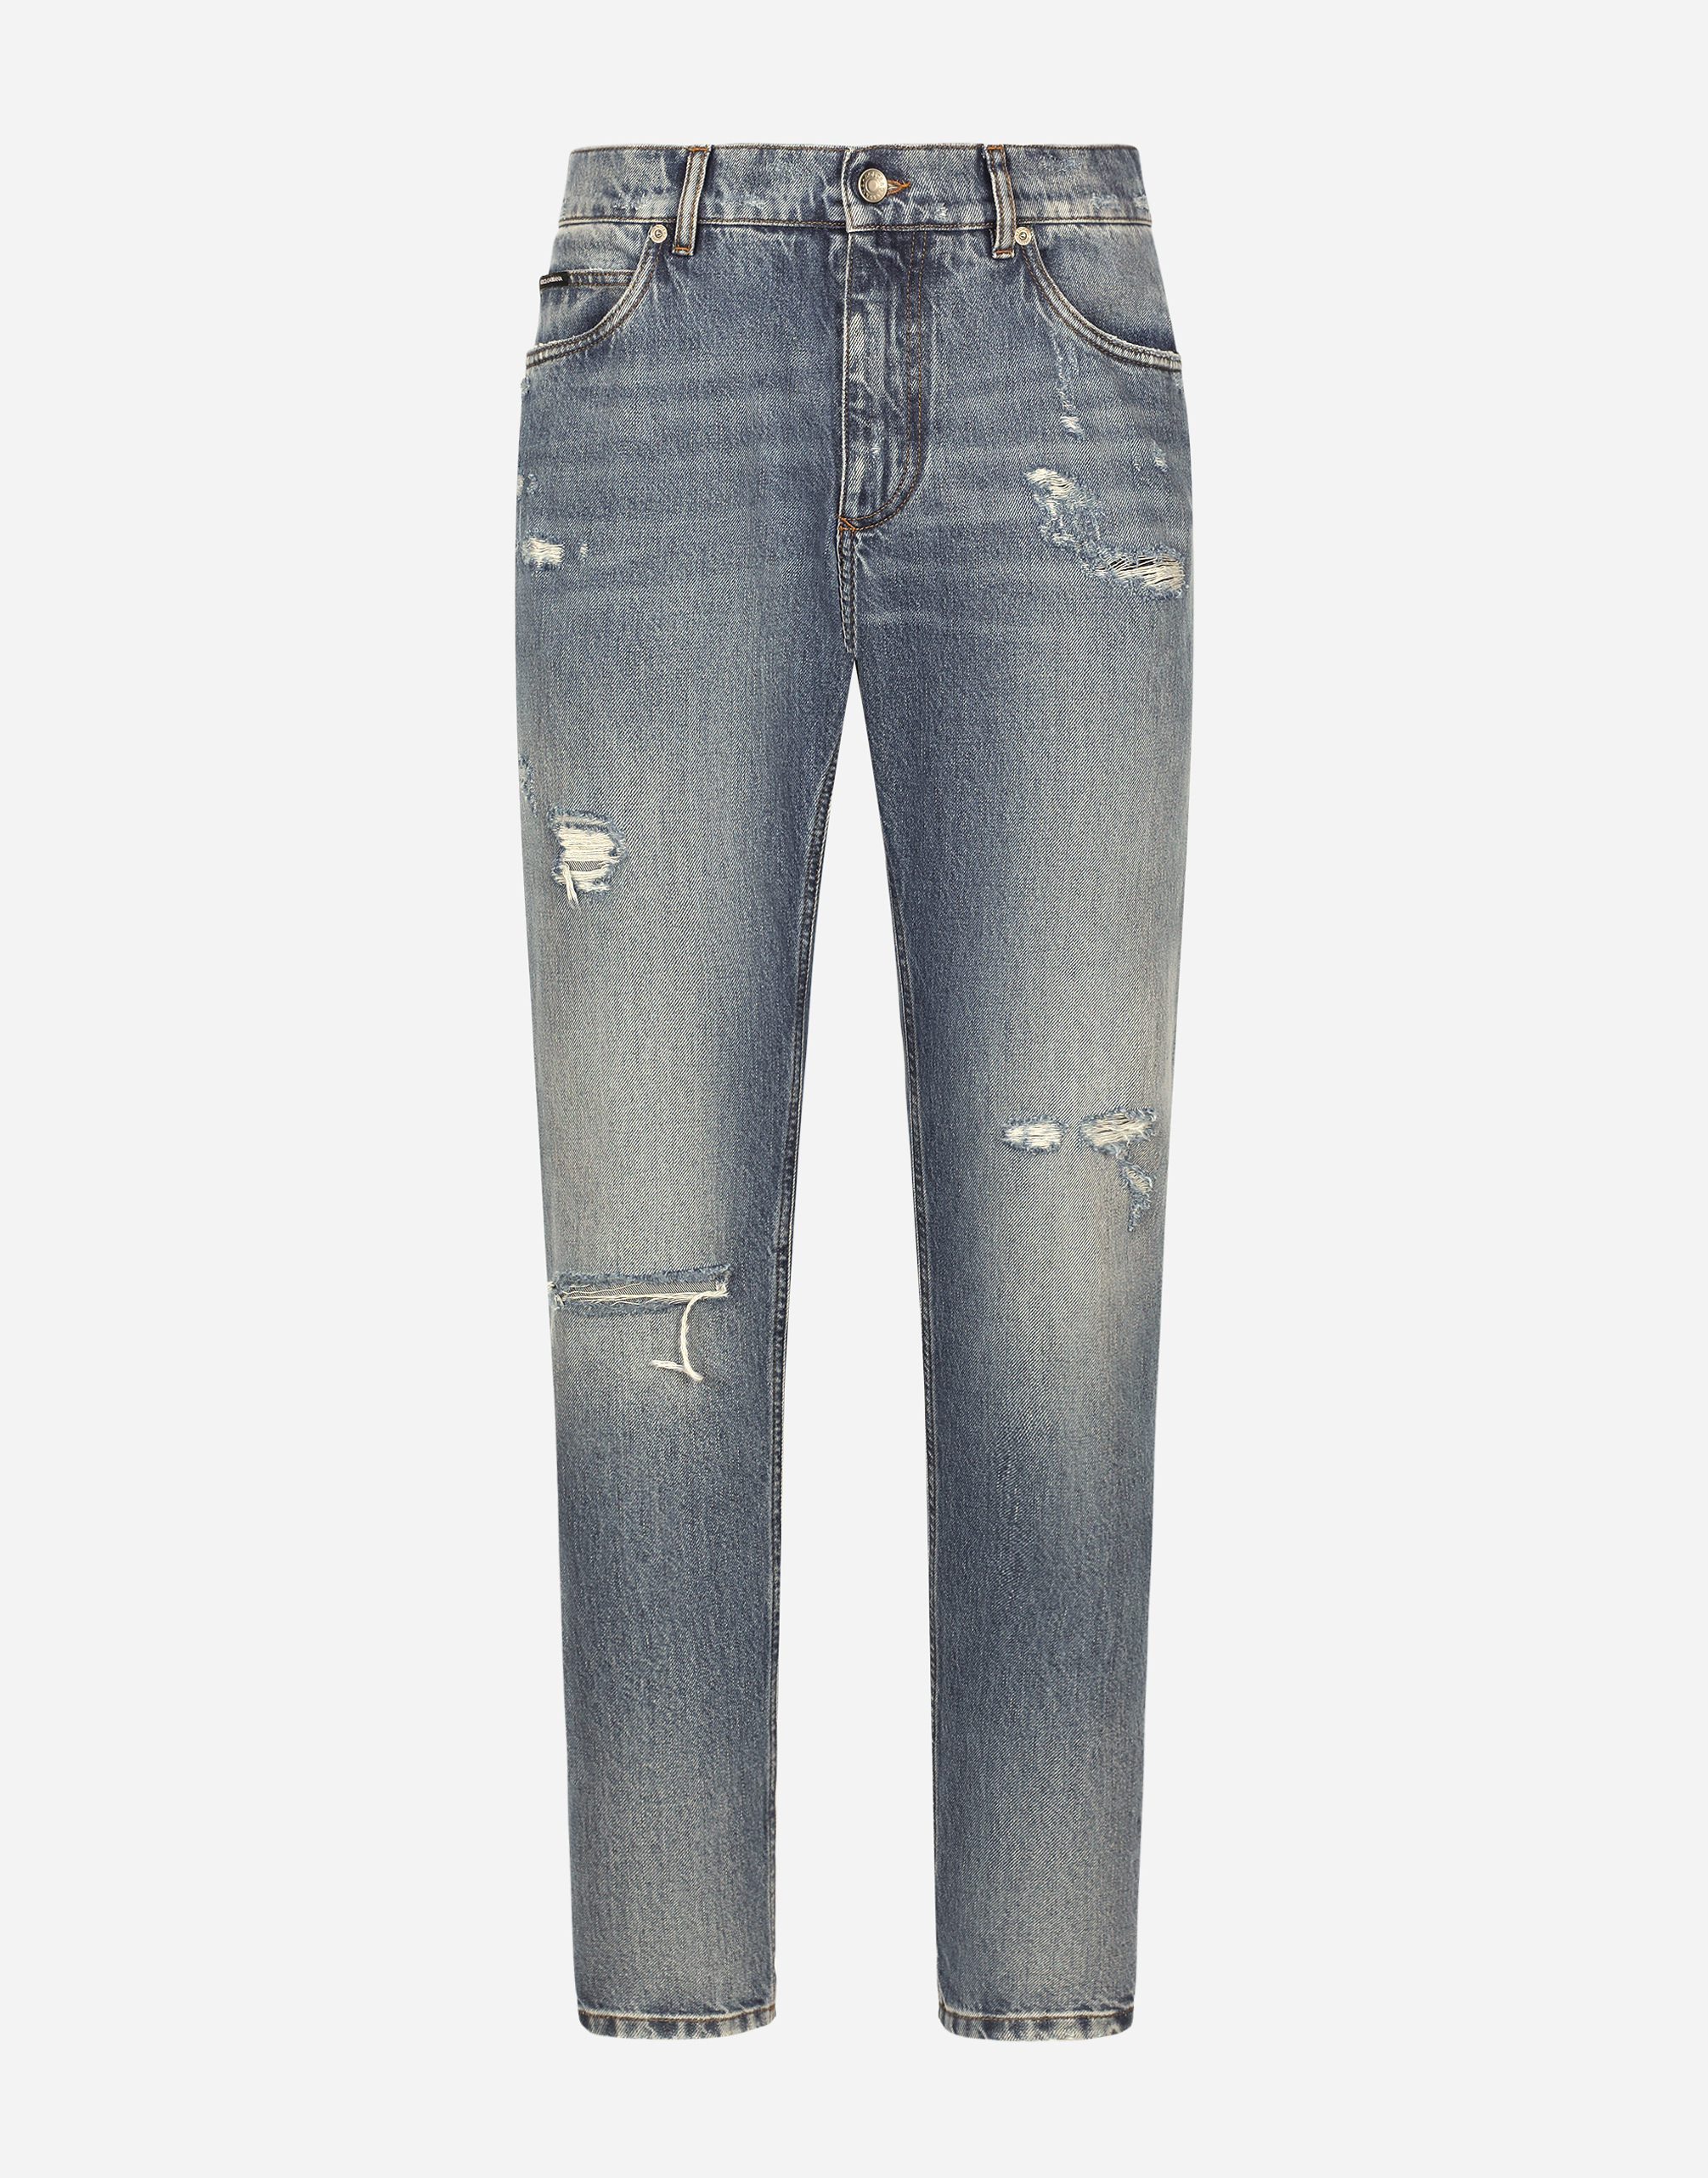 Regular-fit blue wash jeans with abrasions